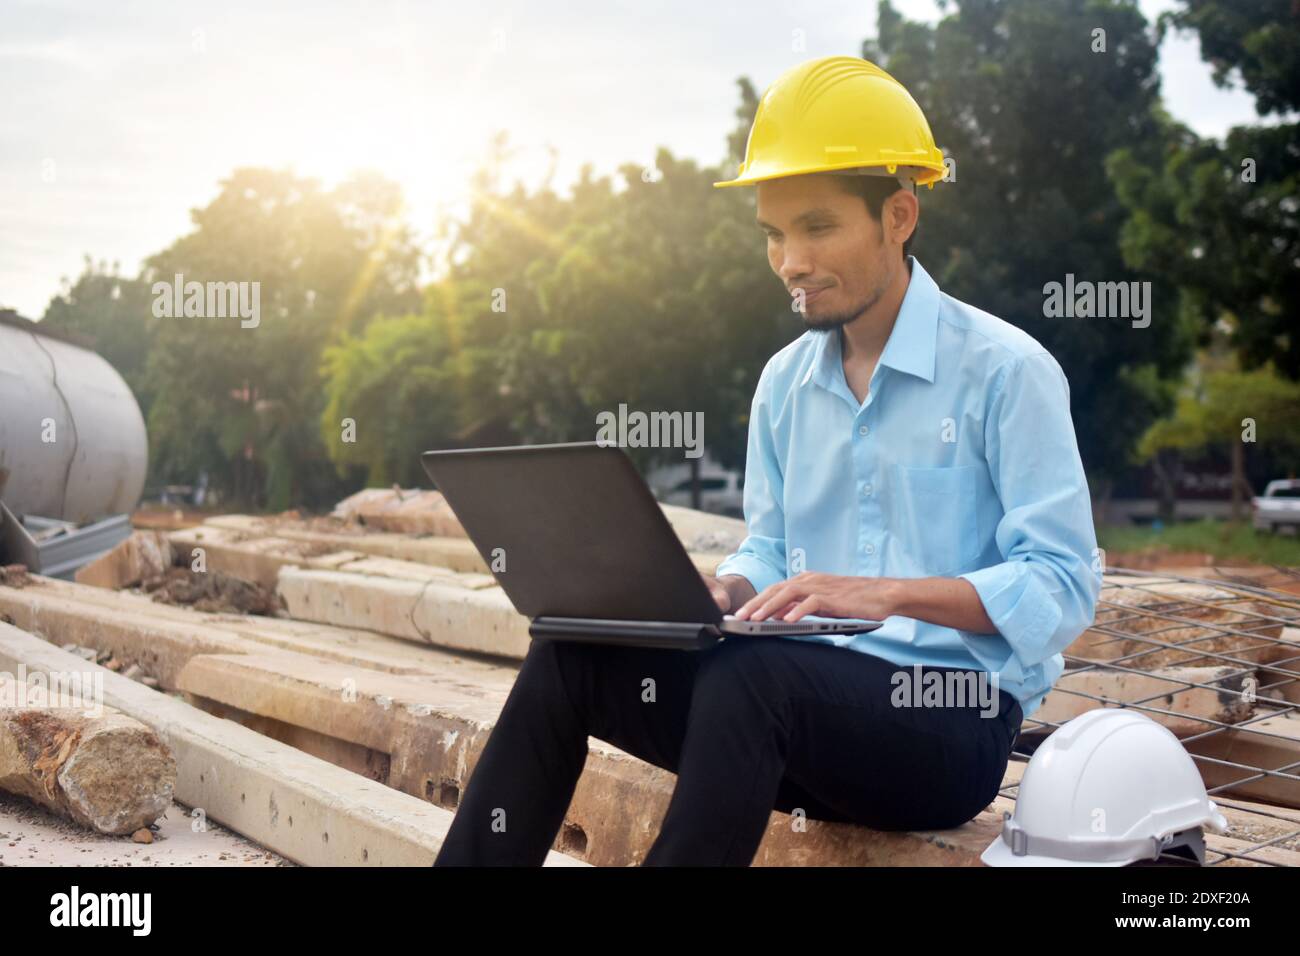 Engineering use computer notebook presentation at work place building estate construction background Stock Photo